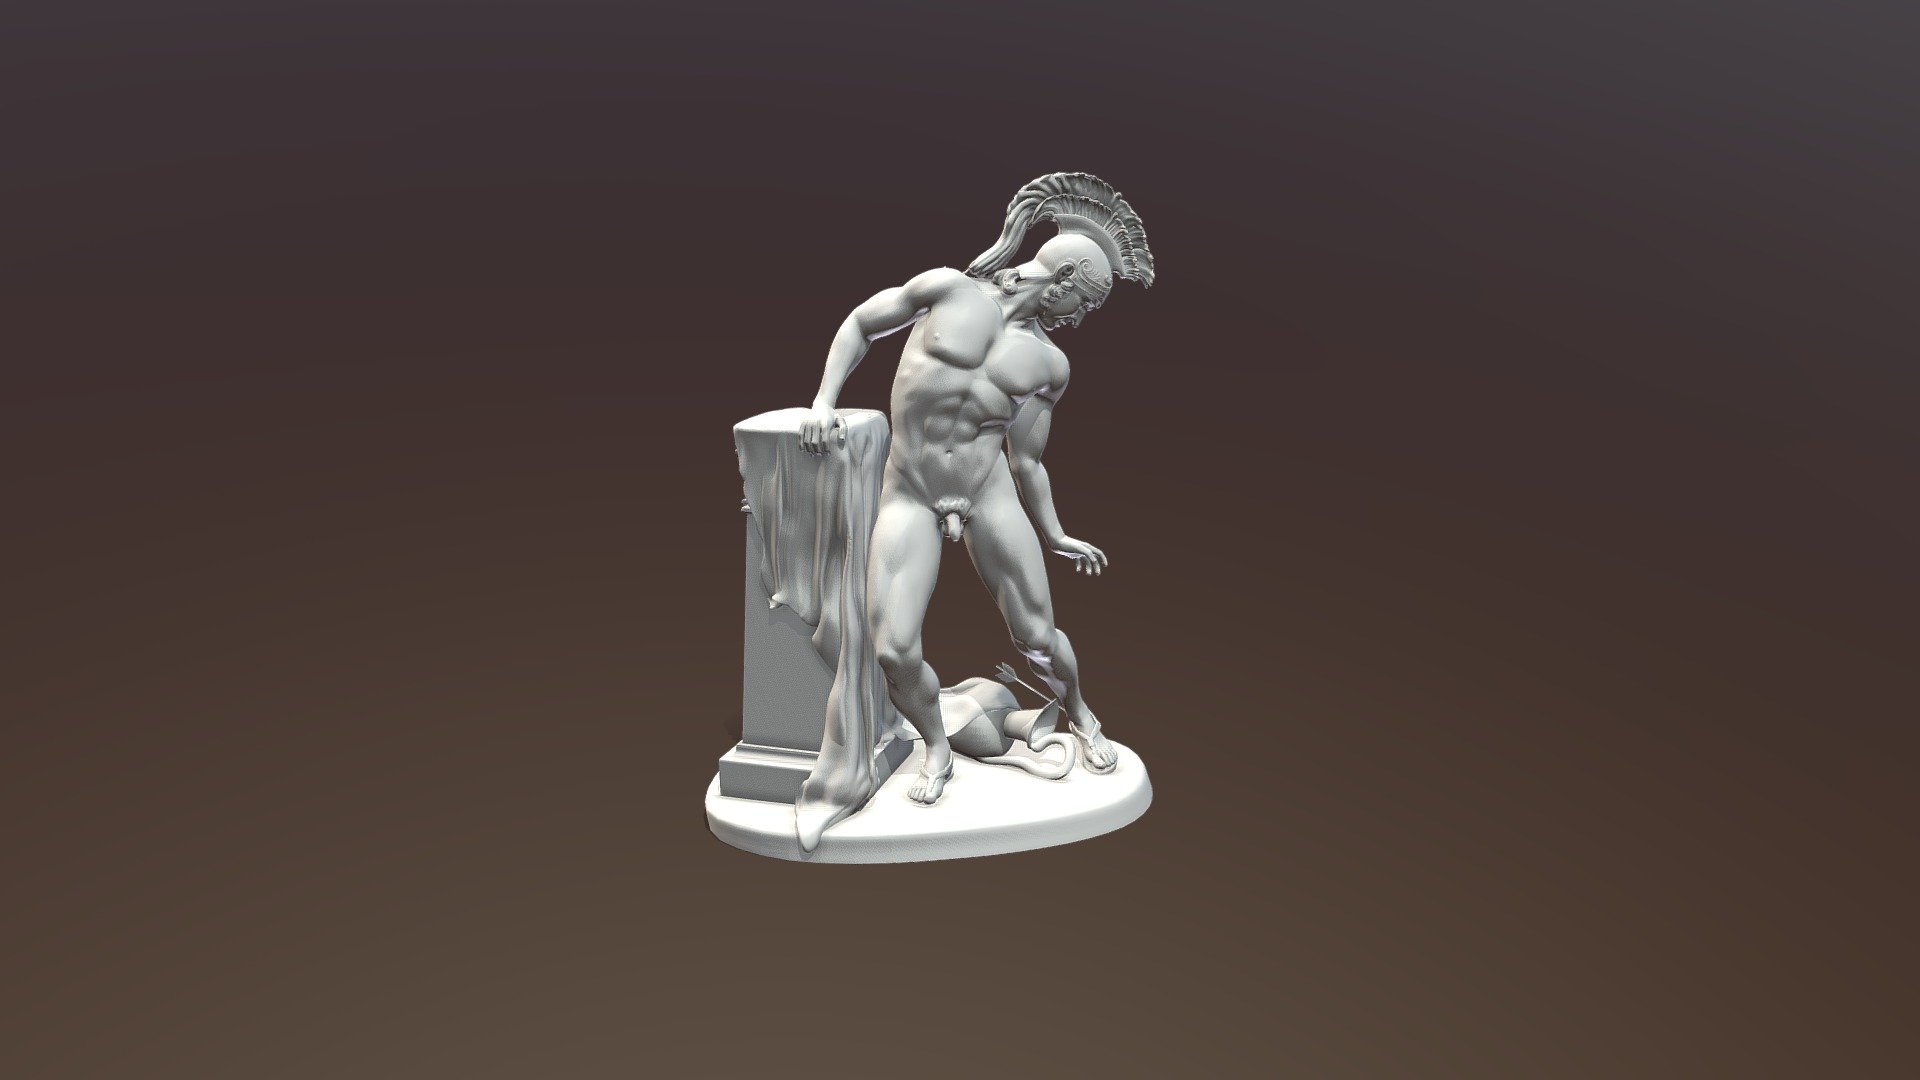 Sculpture of Achilles wounded in his heel, figure created in Zbrush for 3D printing.
Ideal for interior decoration or to collect

The file is in stl format in one piece - Sculpture of Achilles wounded in his heel - Buy Royalty Free 3D model by abauerenator 3d model